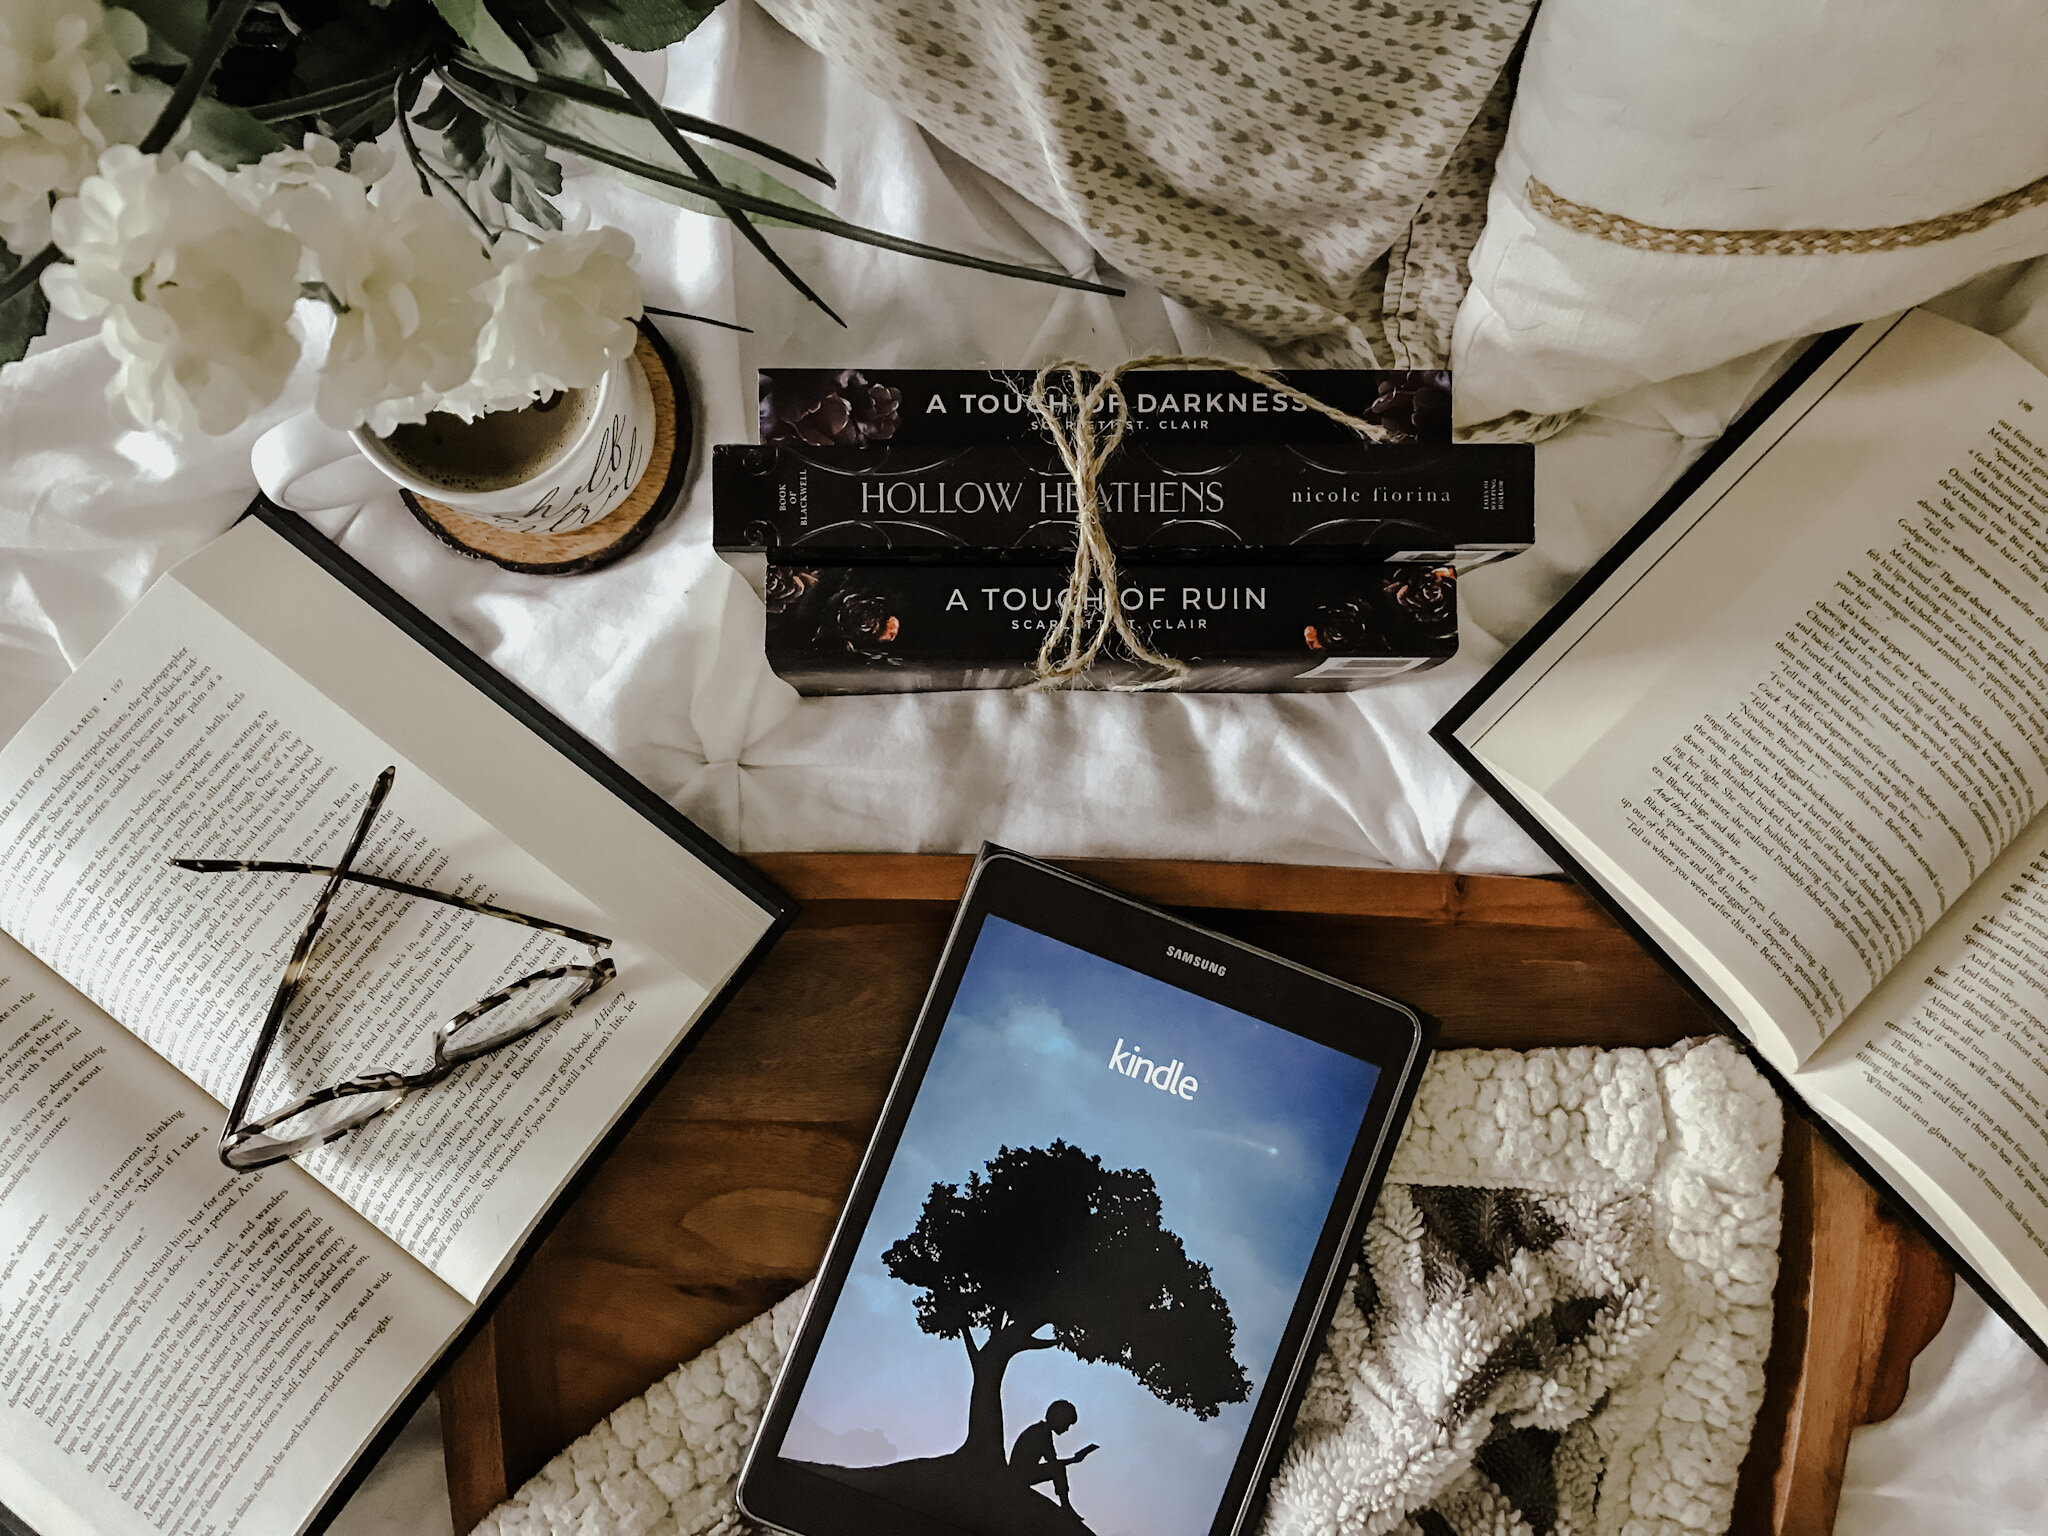 The Best Kindle Unlimited Romance Books with Fall Vibes